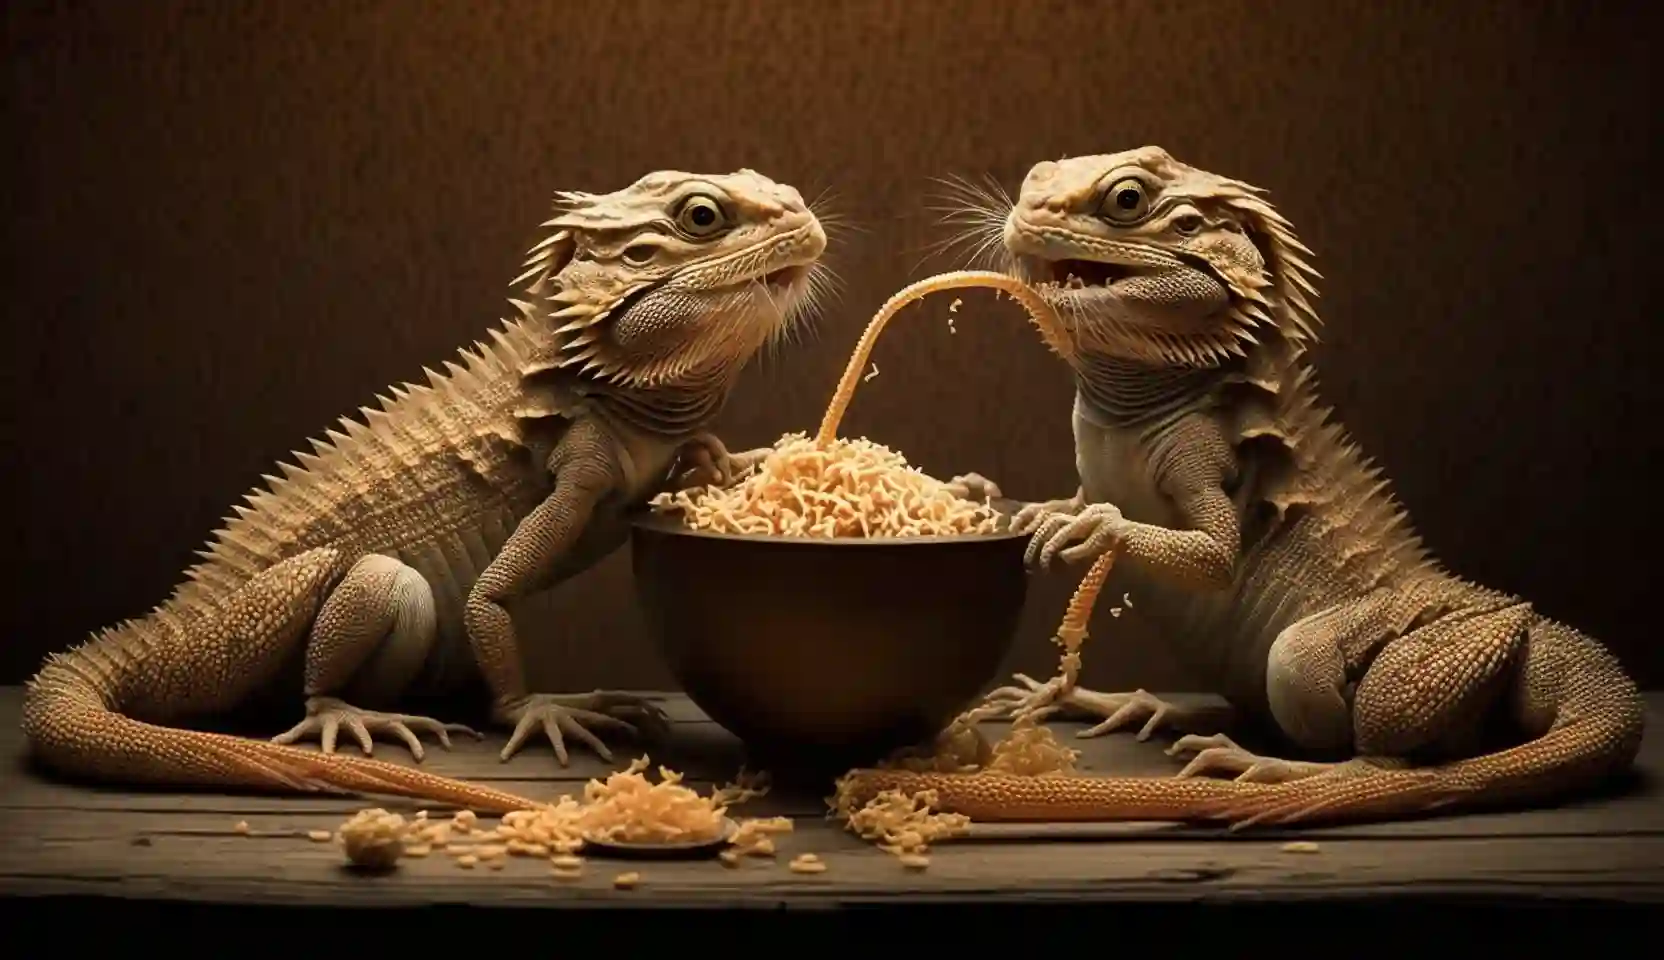 Can Bearded Dragons Have Noodles?